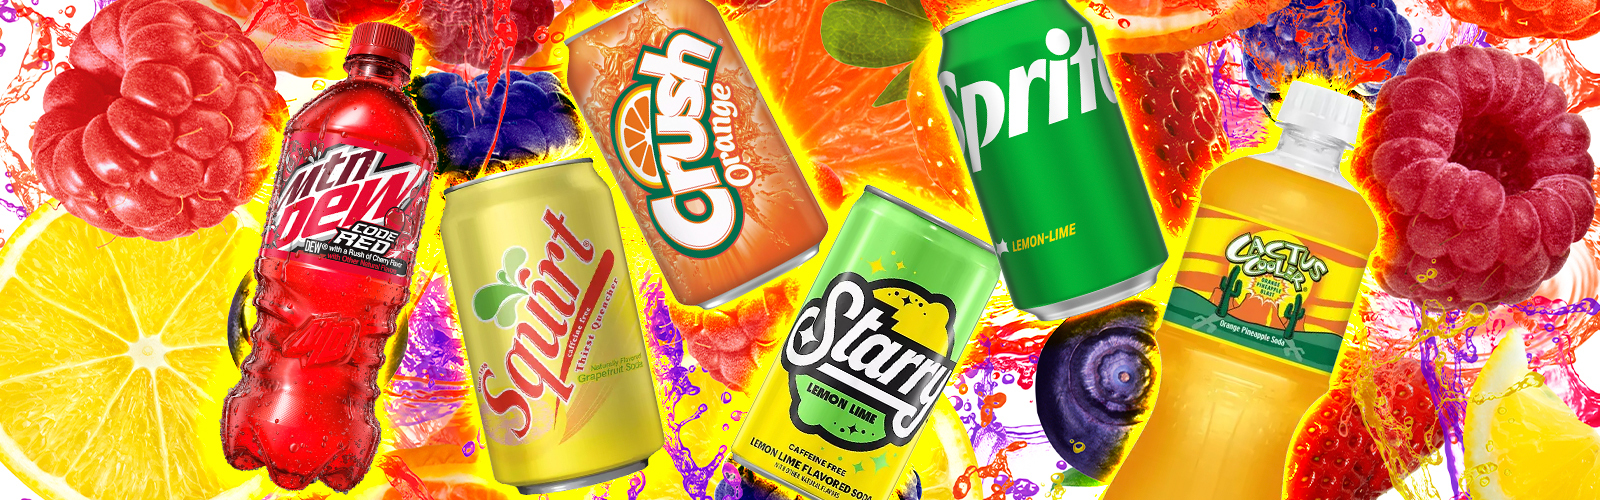 15 Of The Best Fruit Sodas, Blind Taste Tested And Ranked